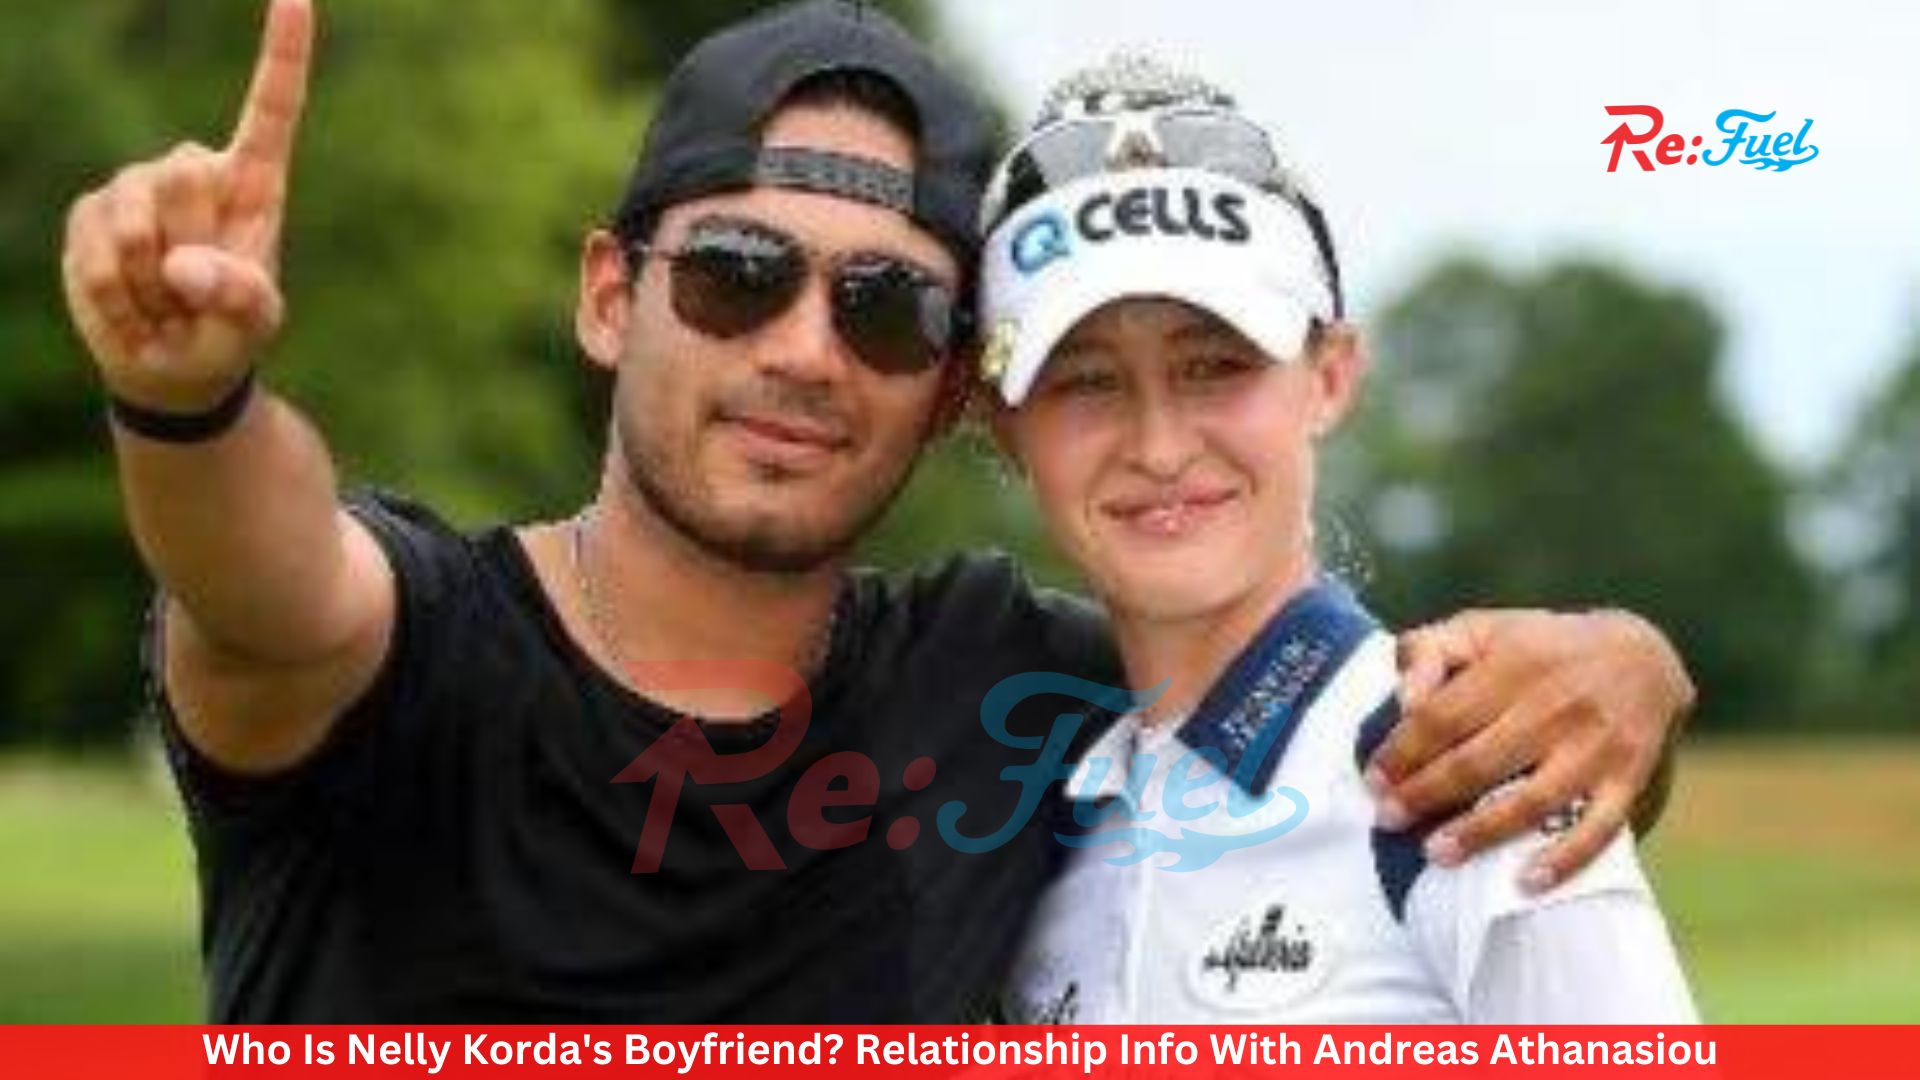 Who Is Nelly Korda's Boyfriend? Relationship Info With Andreas Athanasiou